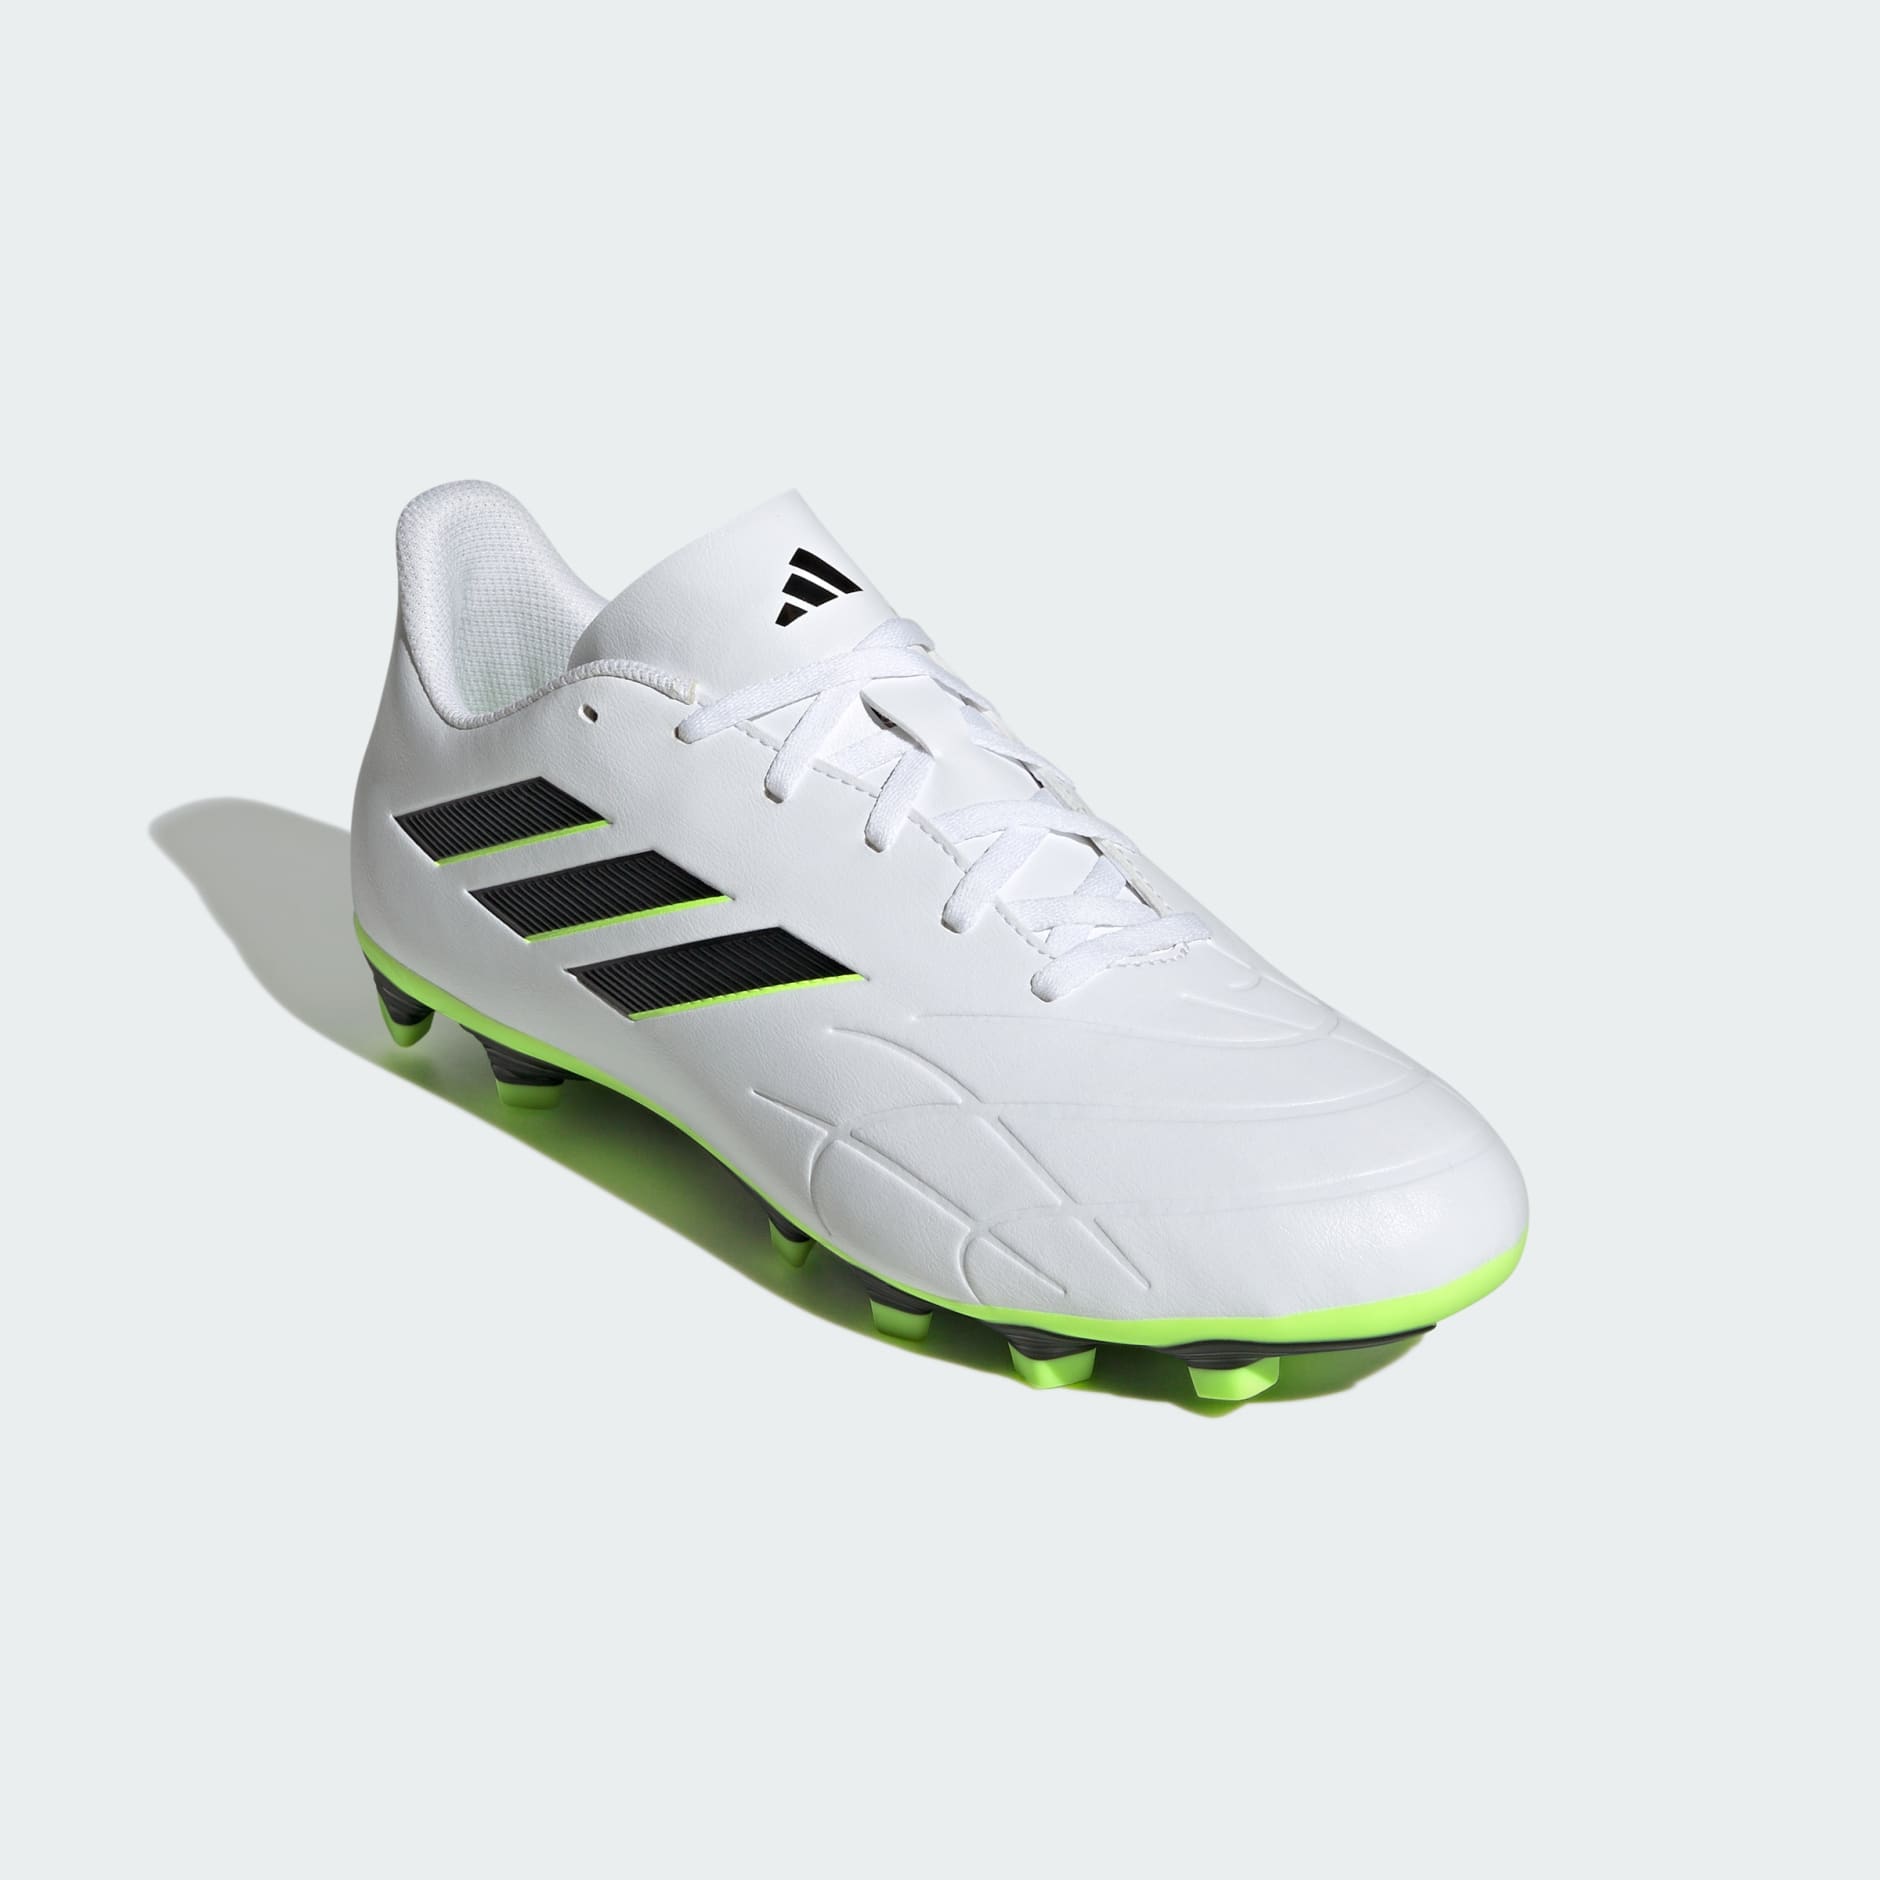 adidas X - Copa Pure.4 Flexible Ground Boots - White | adidas South Africa